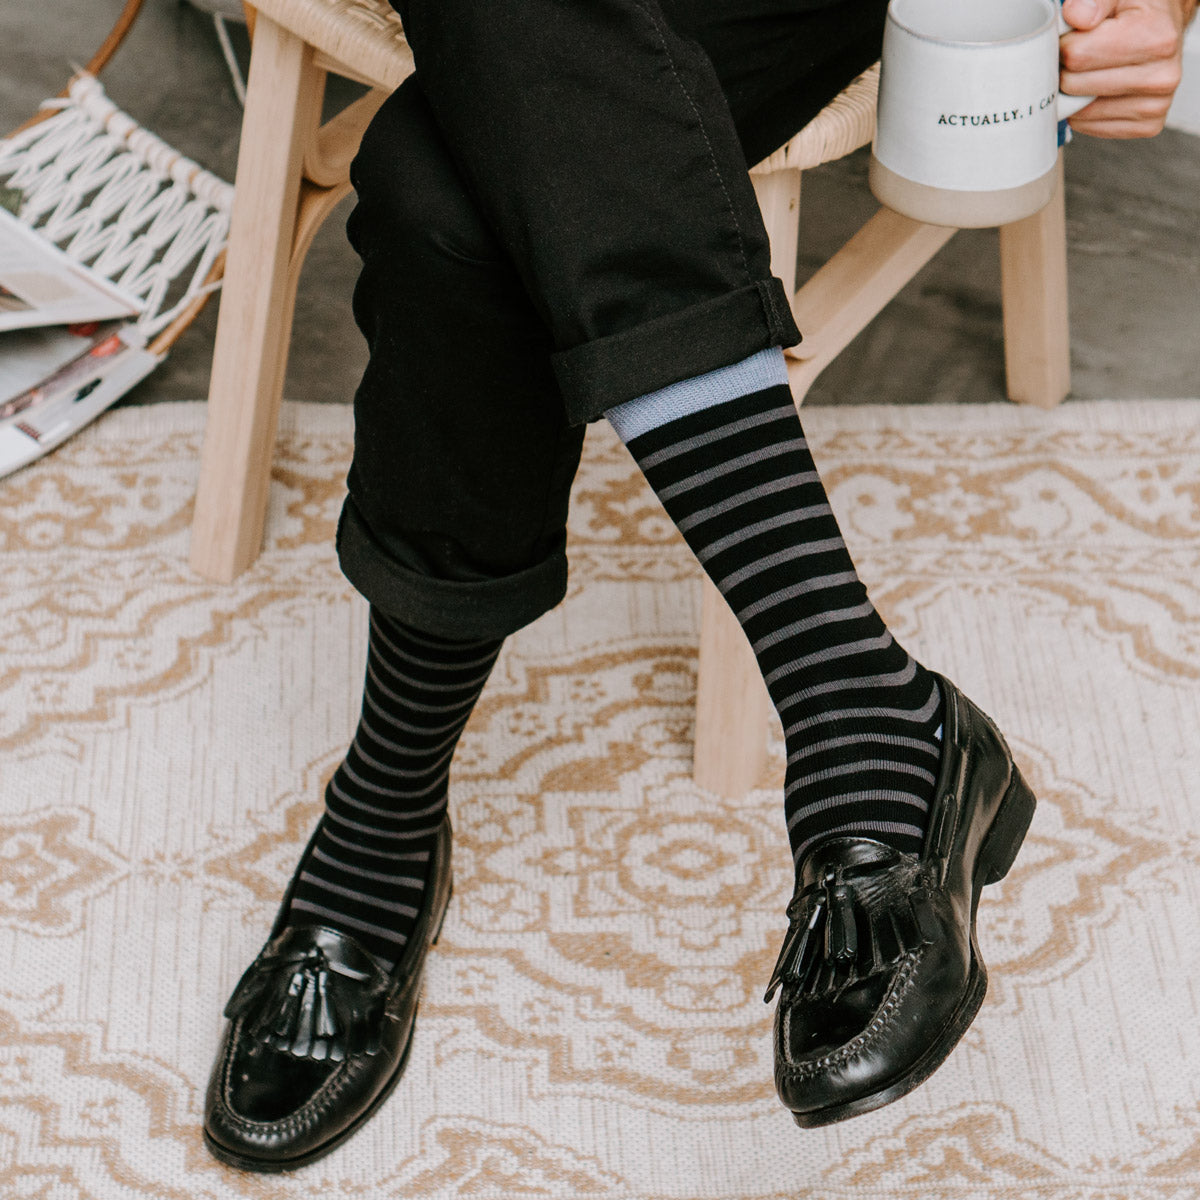 Black and gray dress socks worn with dress shoes and pants